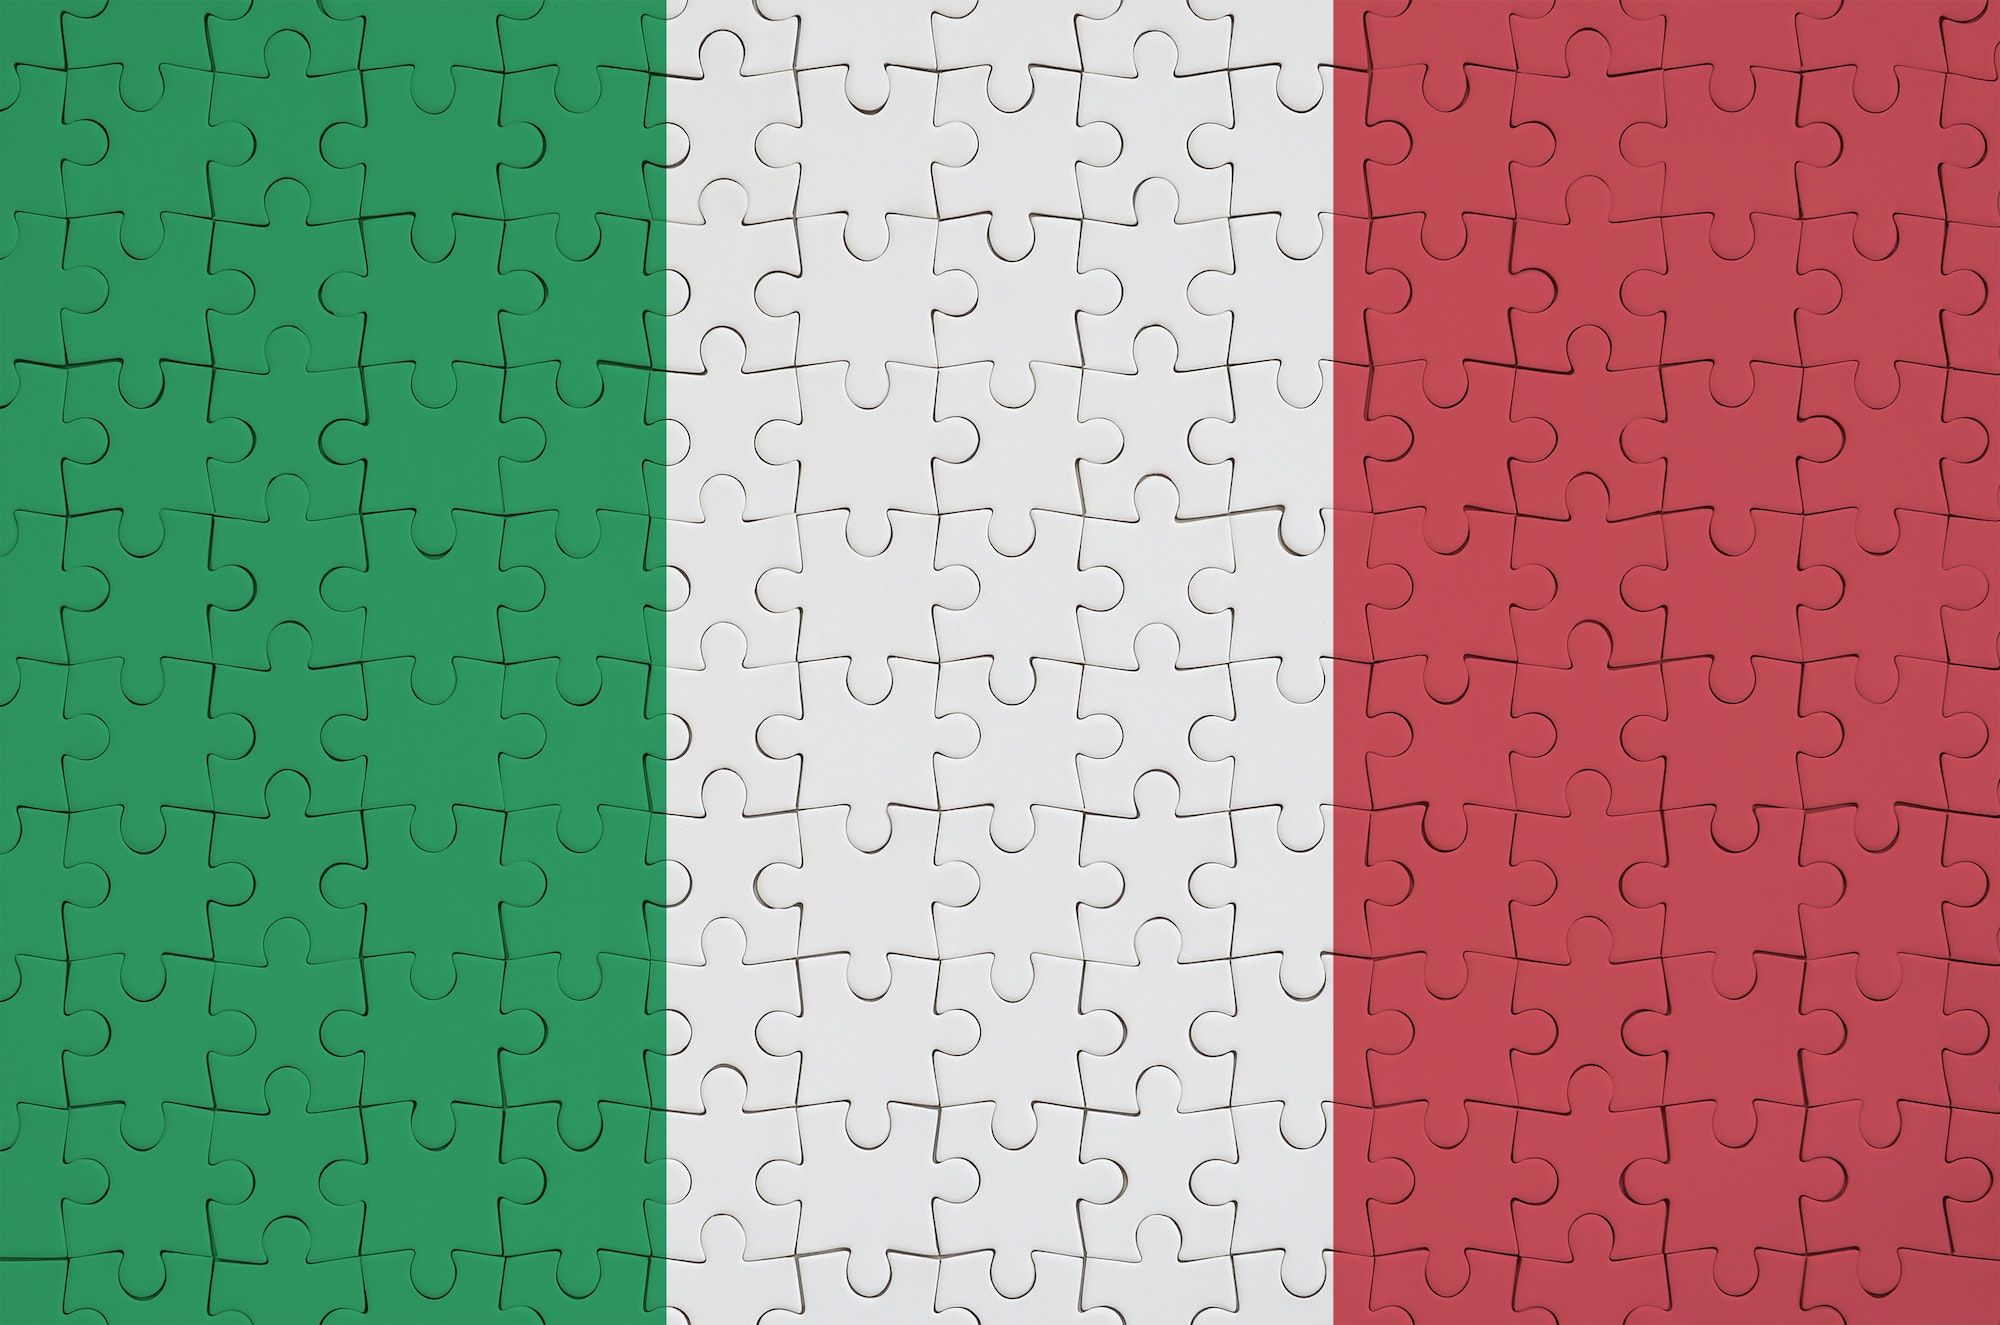 Italy flag is depicted on a folded puzzle